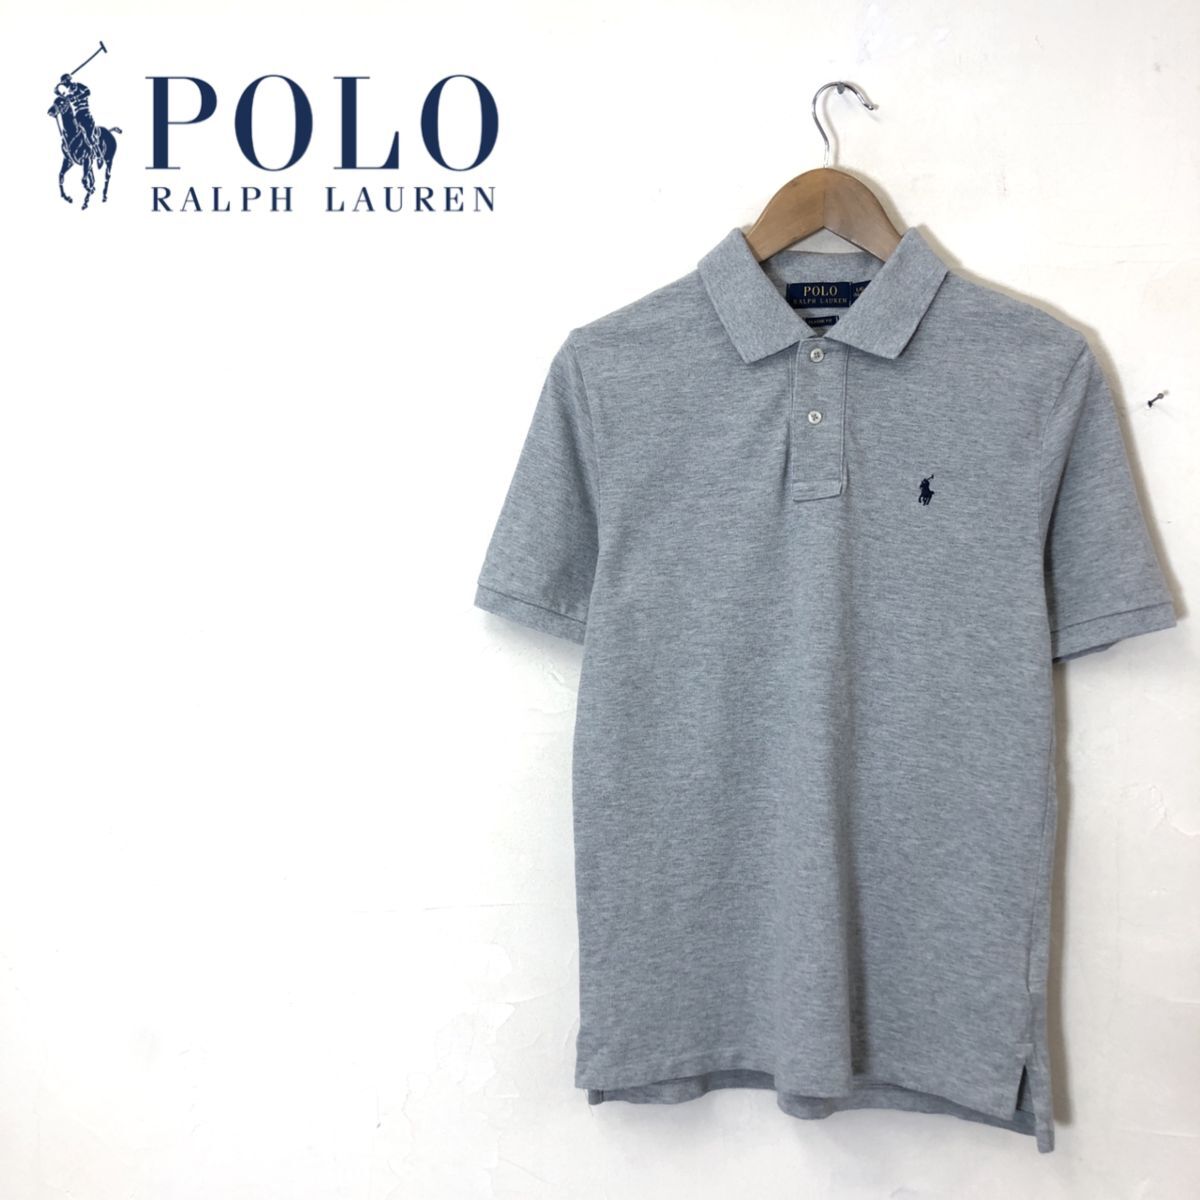 R2125-U-N*POLO RALPH LAUREN Polo Ralph Lauren polo-shirt short sleeves CLASSIC FIT embroidery Logo beautiful . casual *size L/G(14-16) gray cotton 